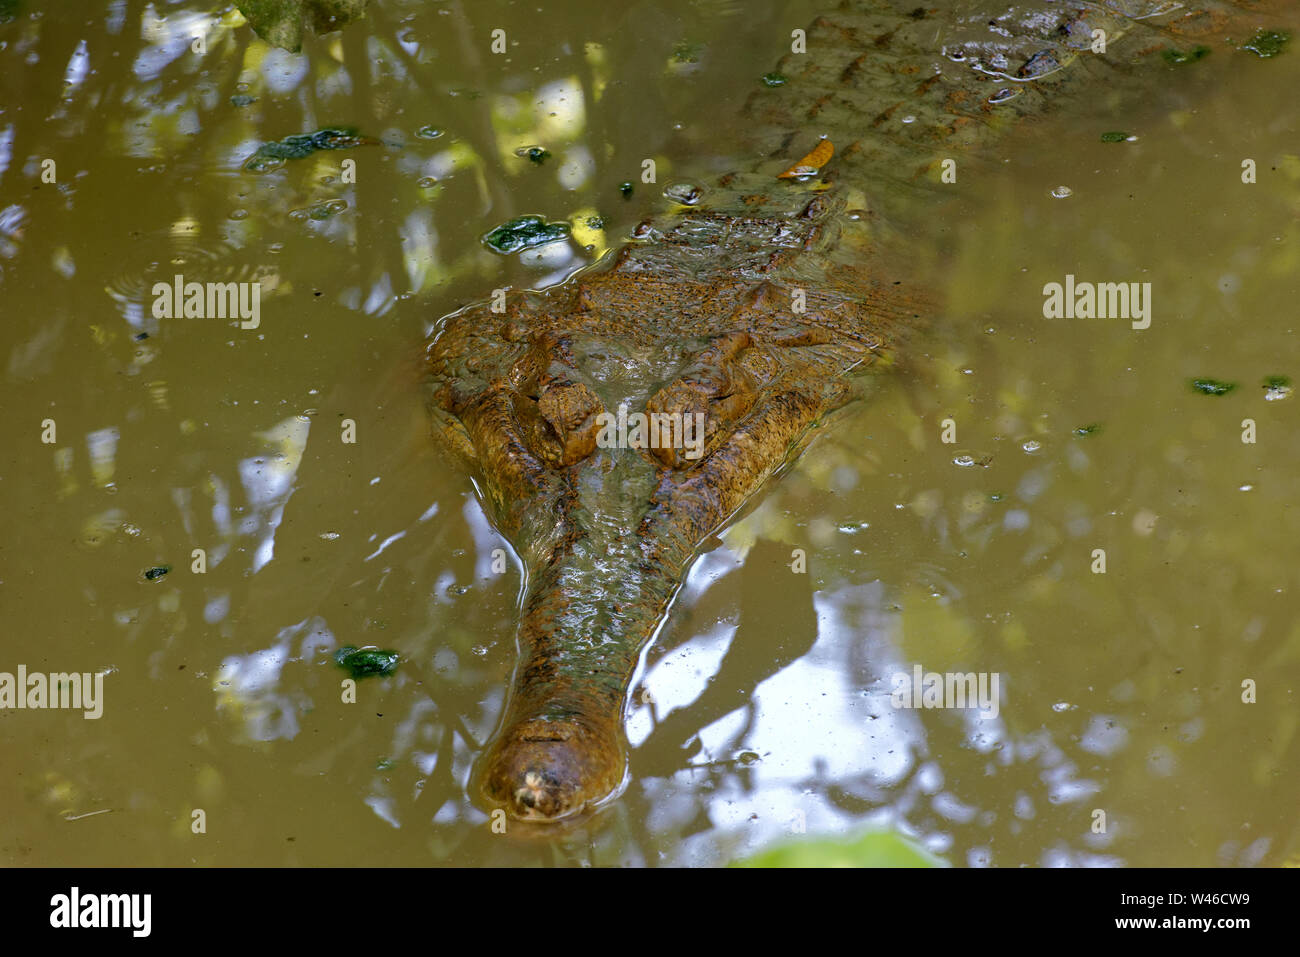 Eyes, head and long snout jaw of a tomistoma fresh water crocodile, partly submerged, Sarawak, Malaysia Stock Photo